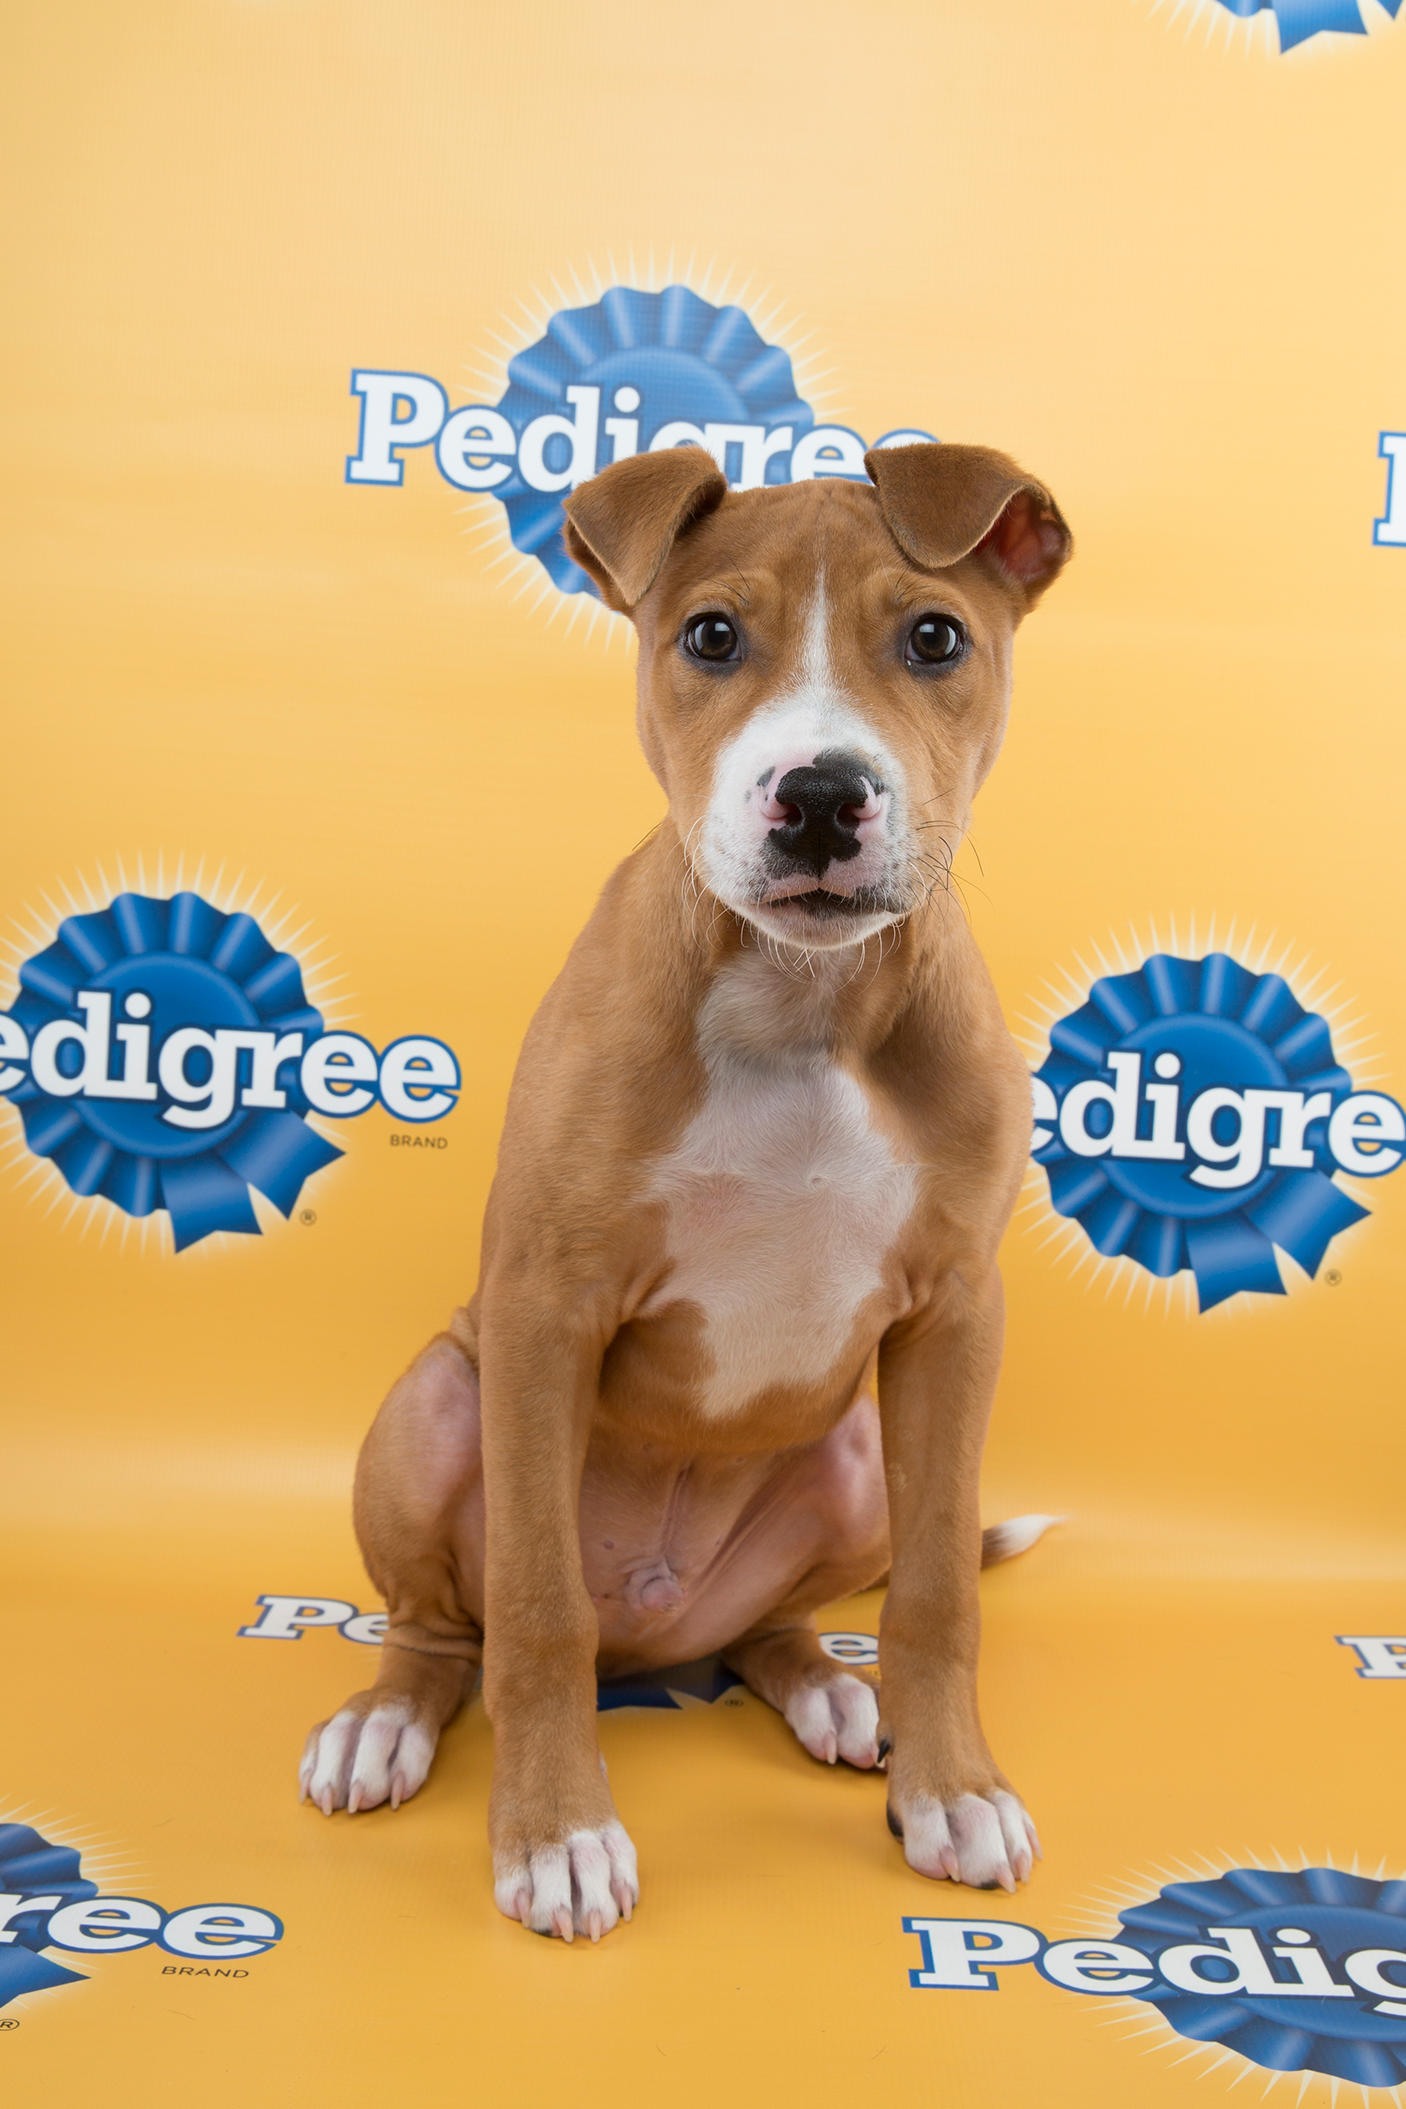 Jamison Puppy Bowl 11, puppy bowl xi, puppy bowl, starting lineup, lineup, puppy, puppies